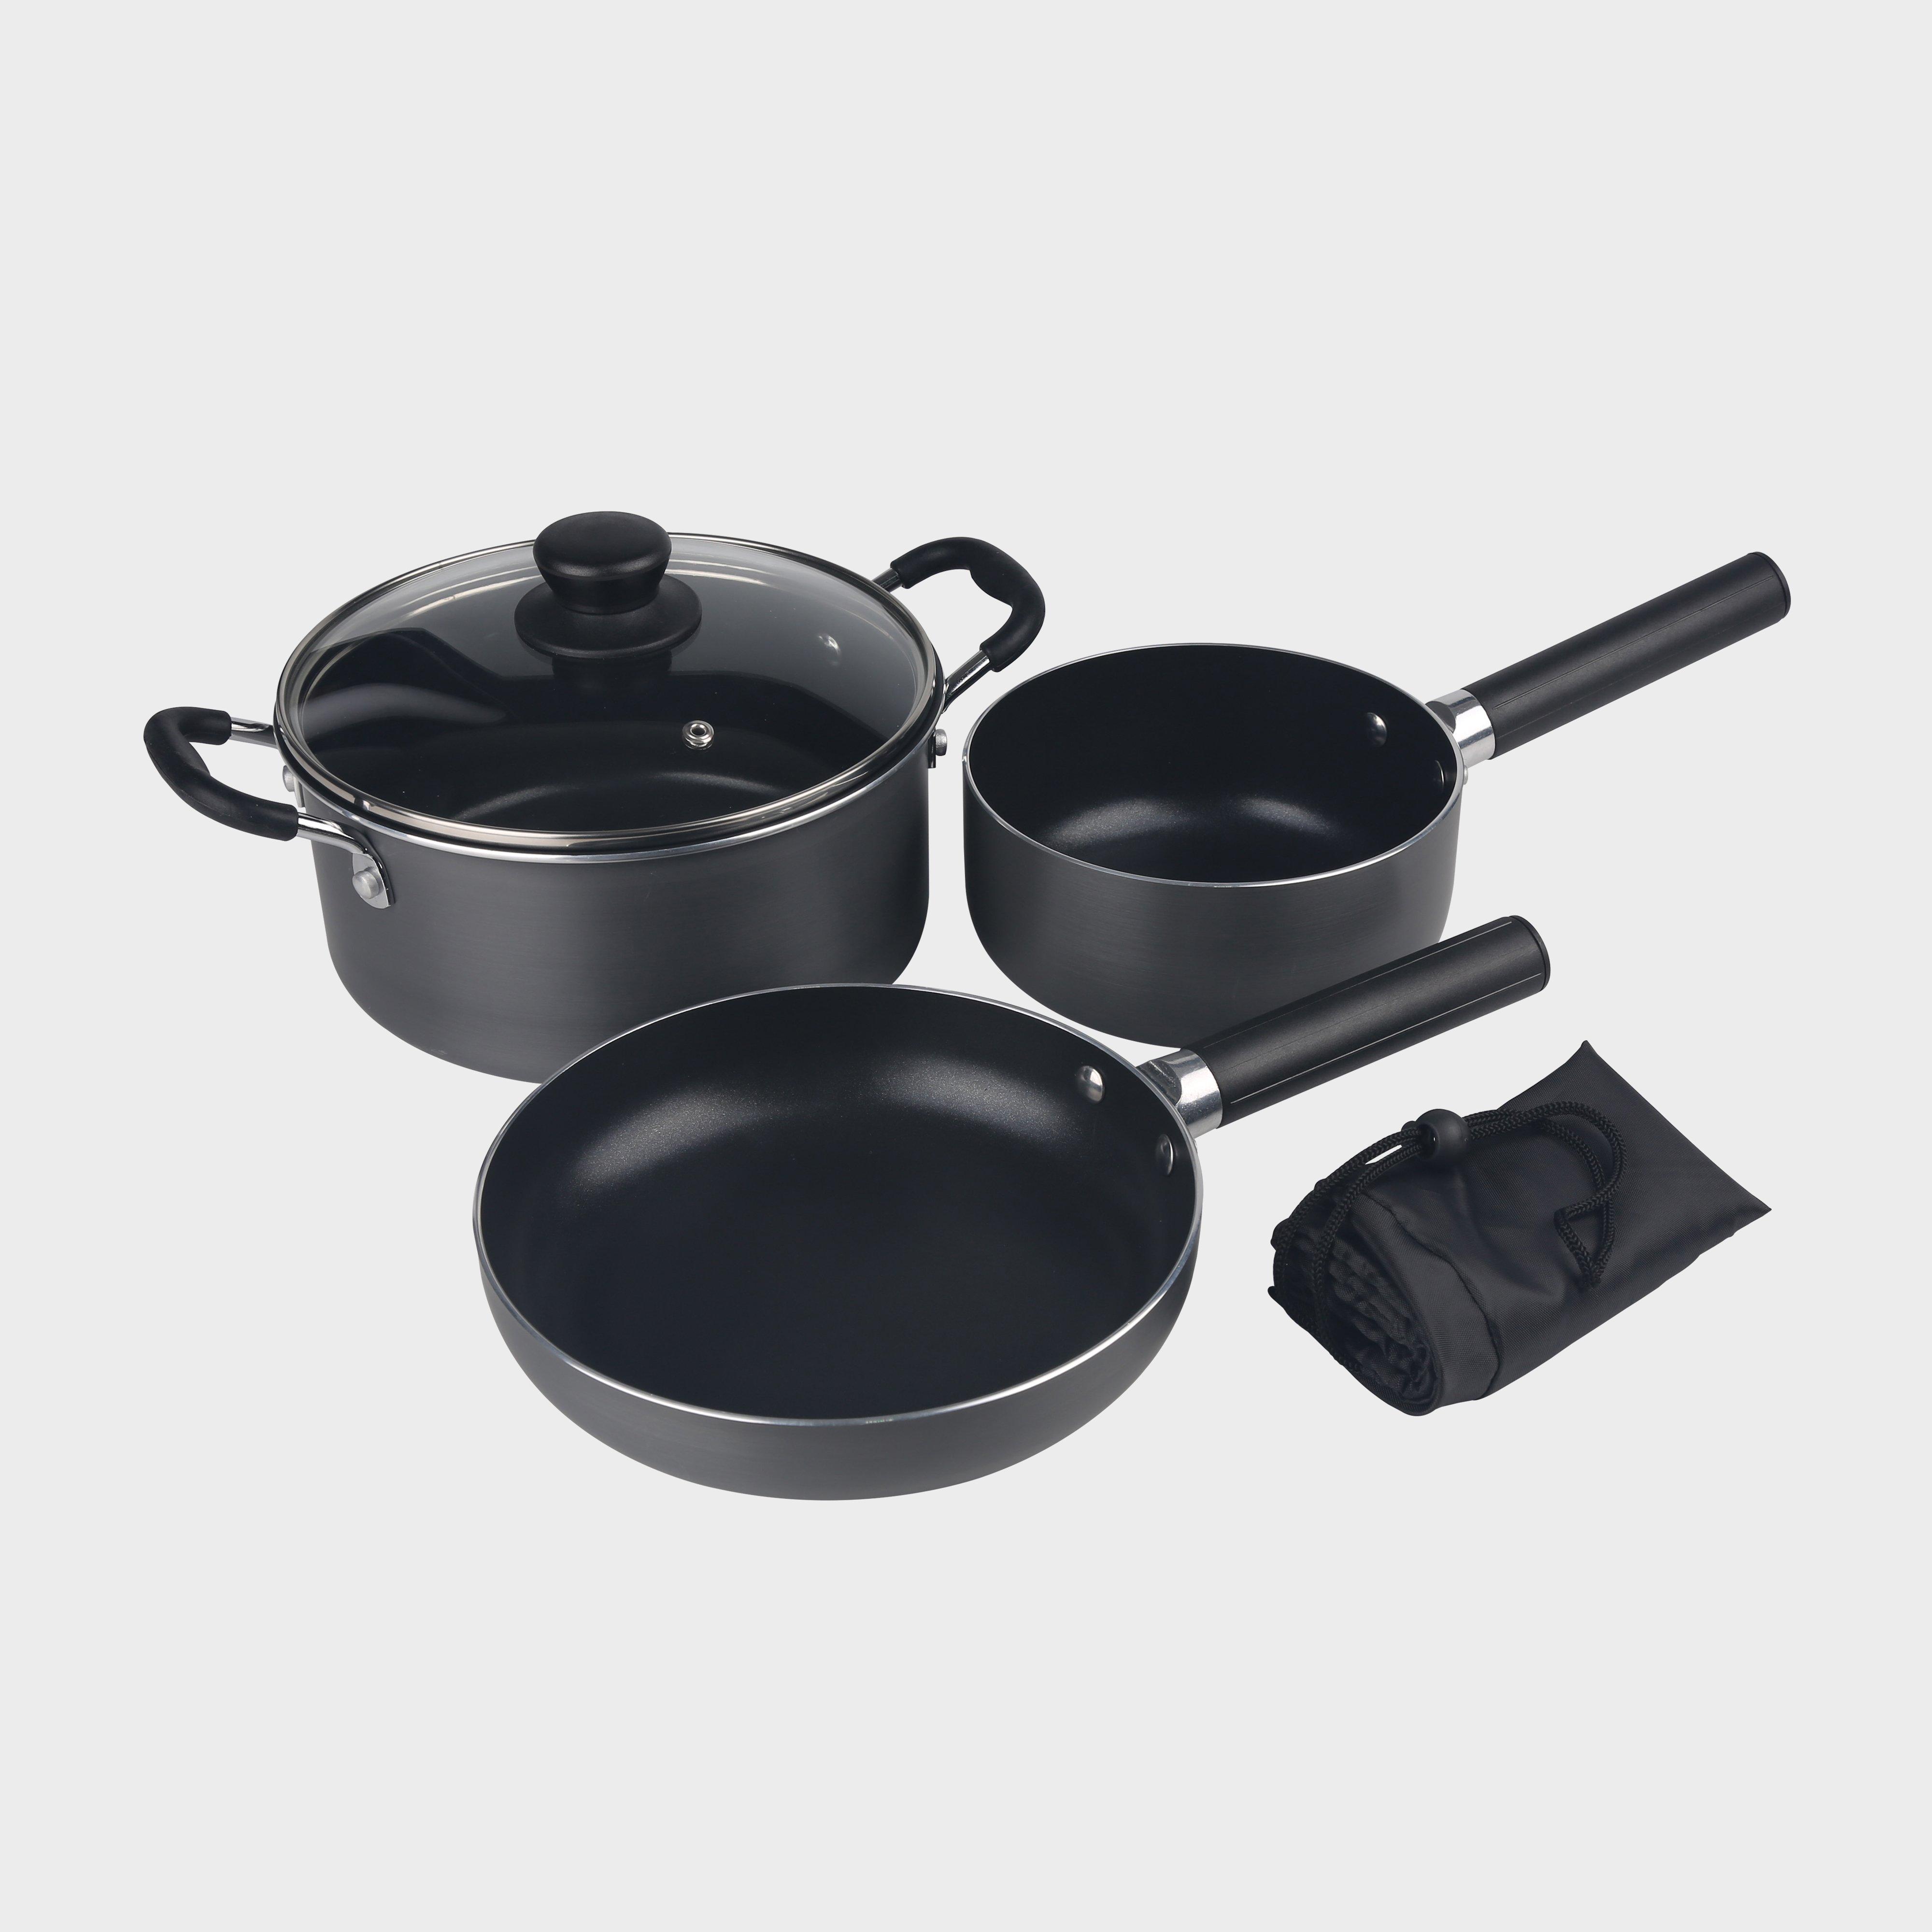 NGT Three Way Frying Pan With Lid Review